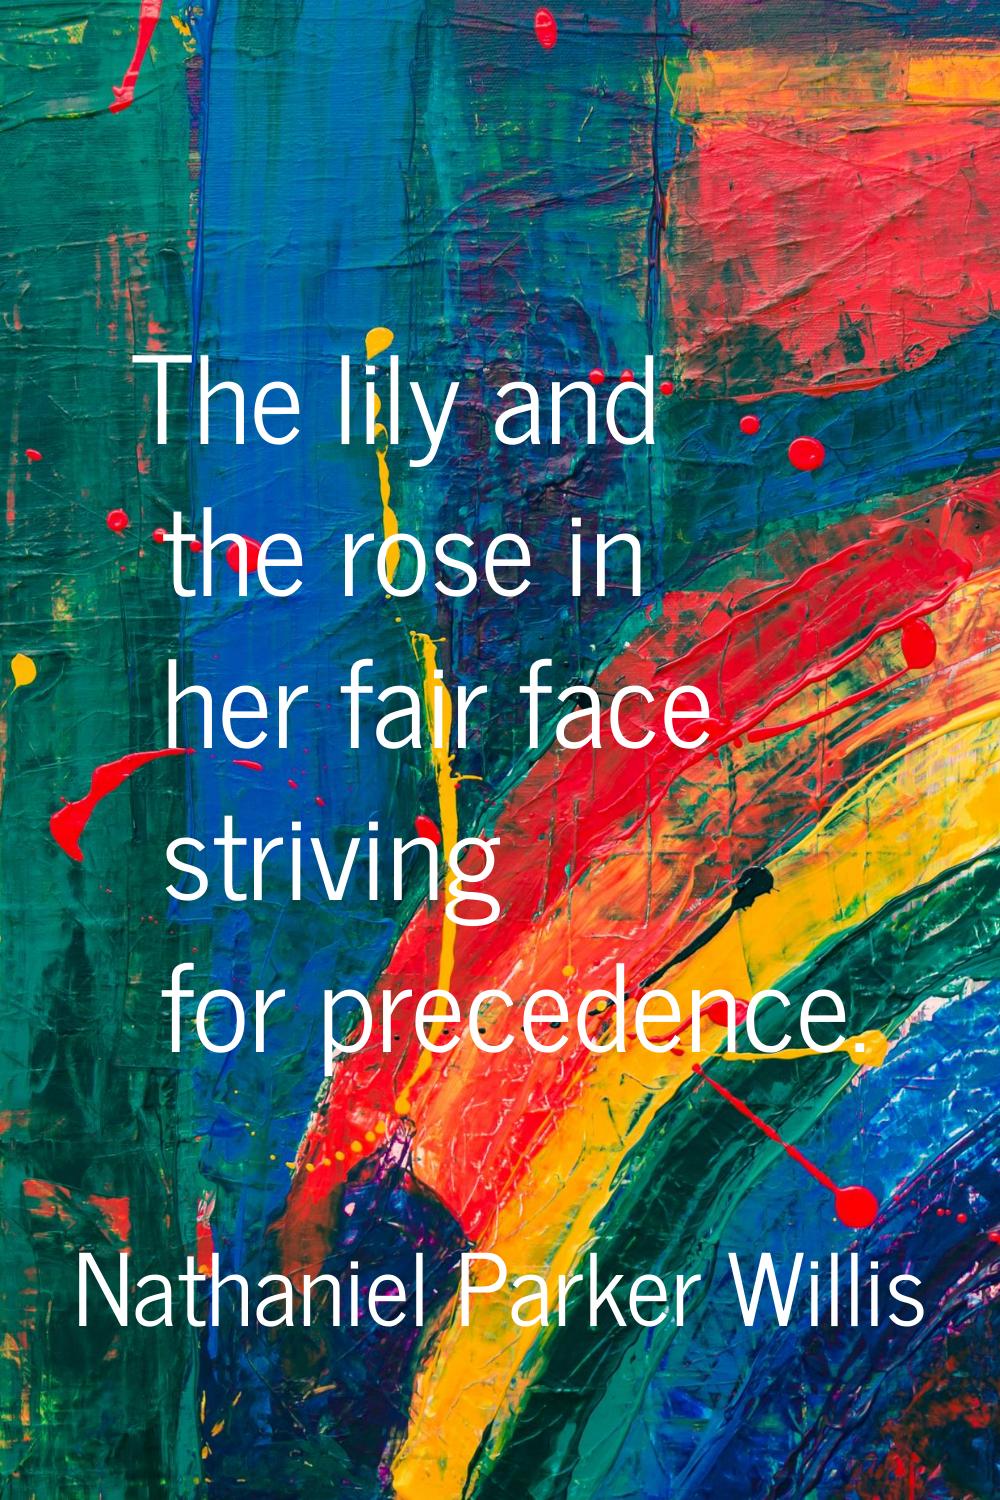 The lily and the rose in her fair face striving for precedence.